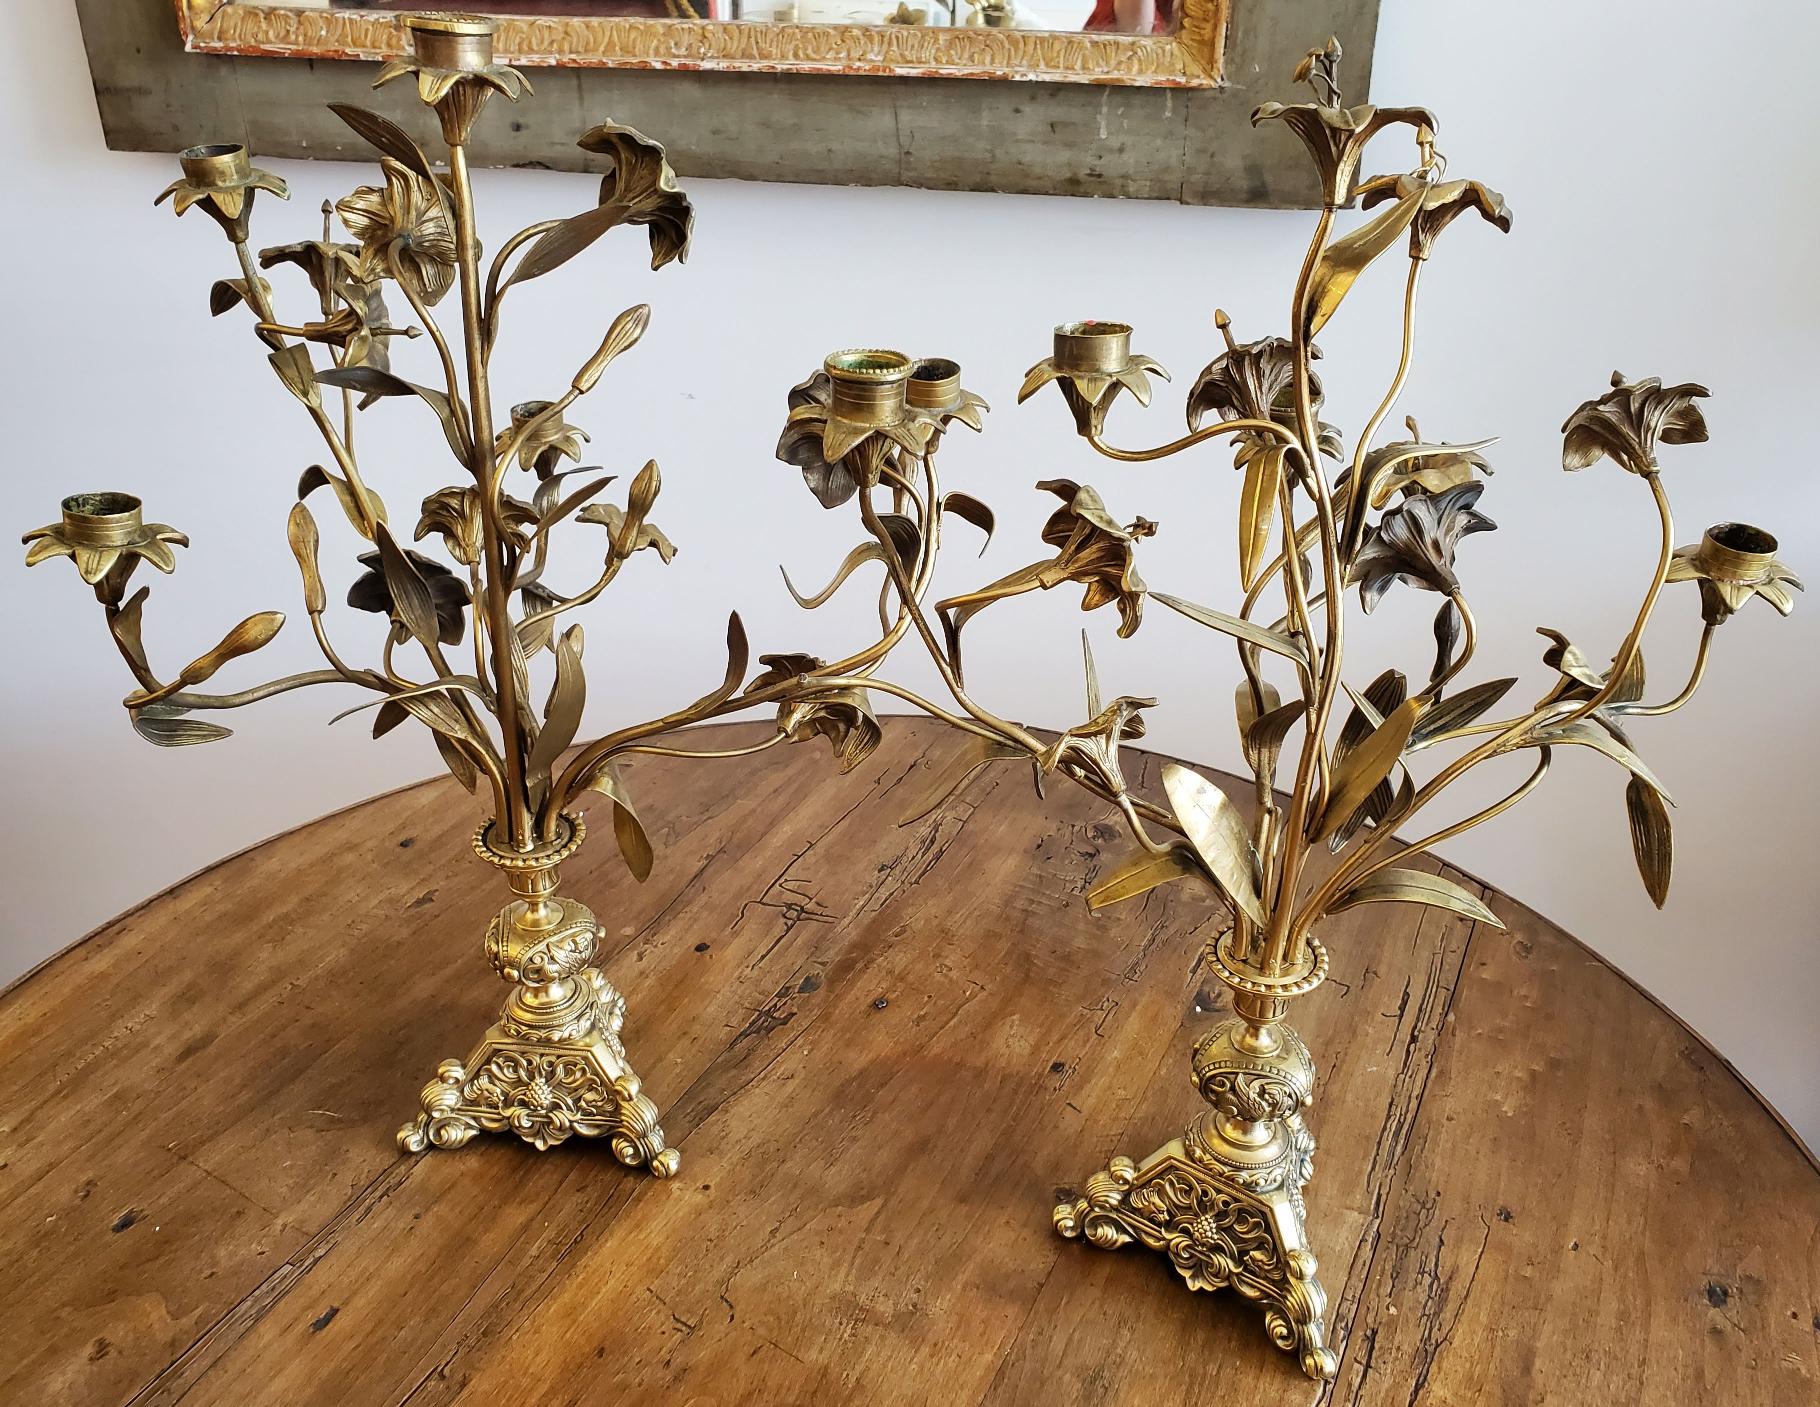 Pair of late 19th century French brass flower candelabra. Made of deeply patinated brass with intricately cast flower and leaf motifs. These are so beautiful, they will quickly become one of your favorite pieces in your home.
France, 1870.